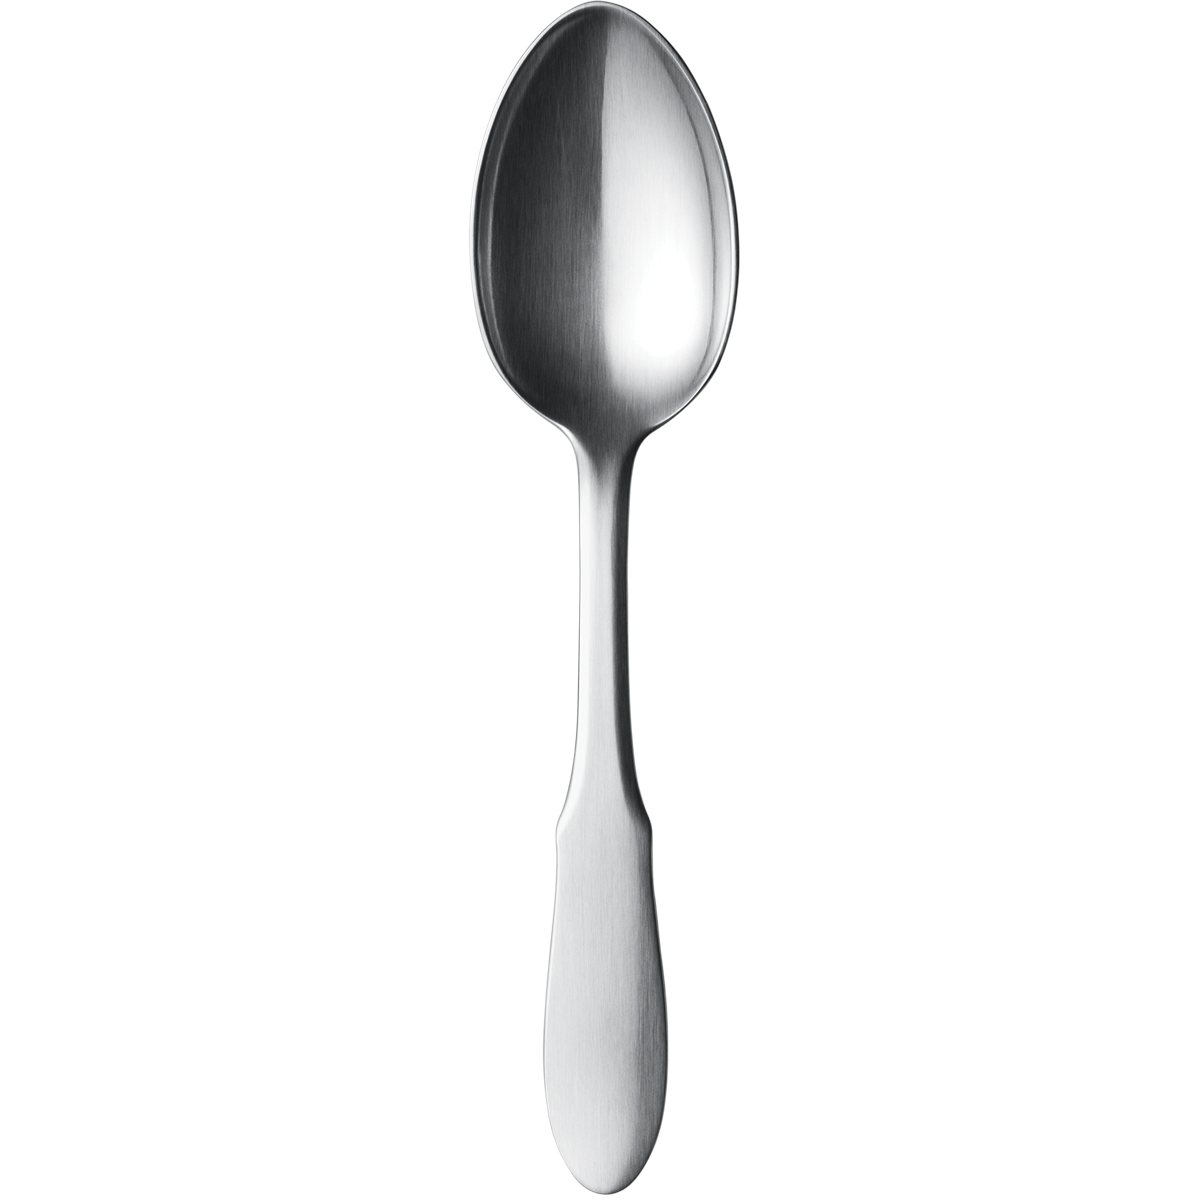 Spoon Png Image - Spoon, Transparent background PNG HD thumbnail